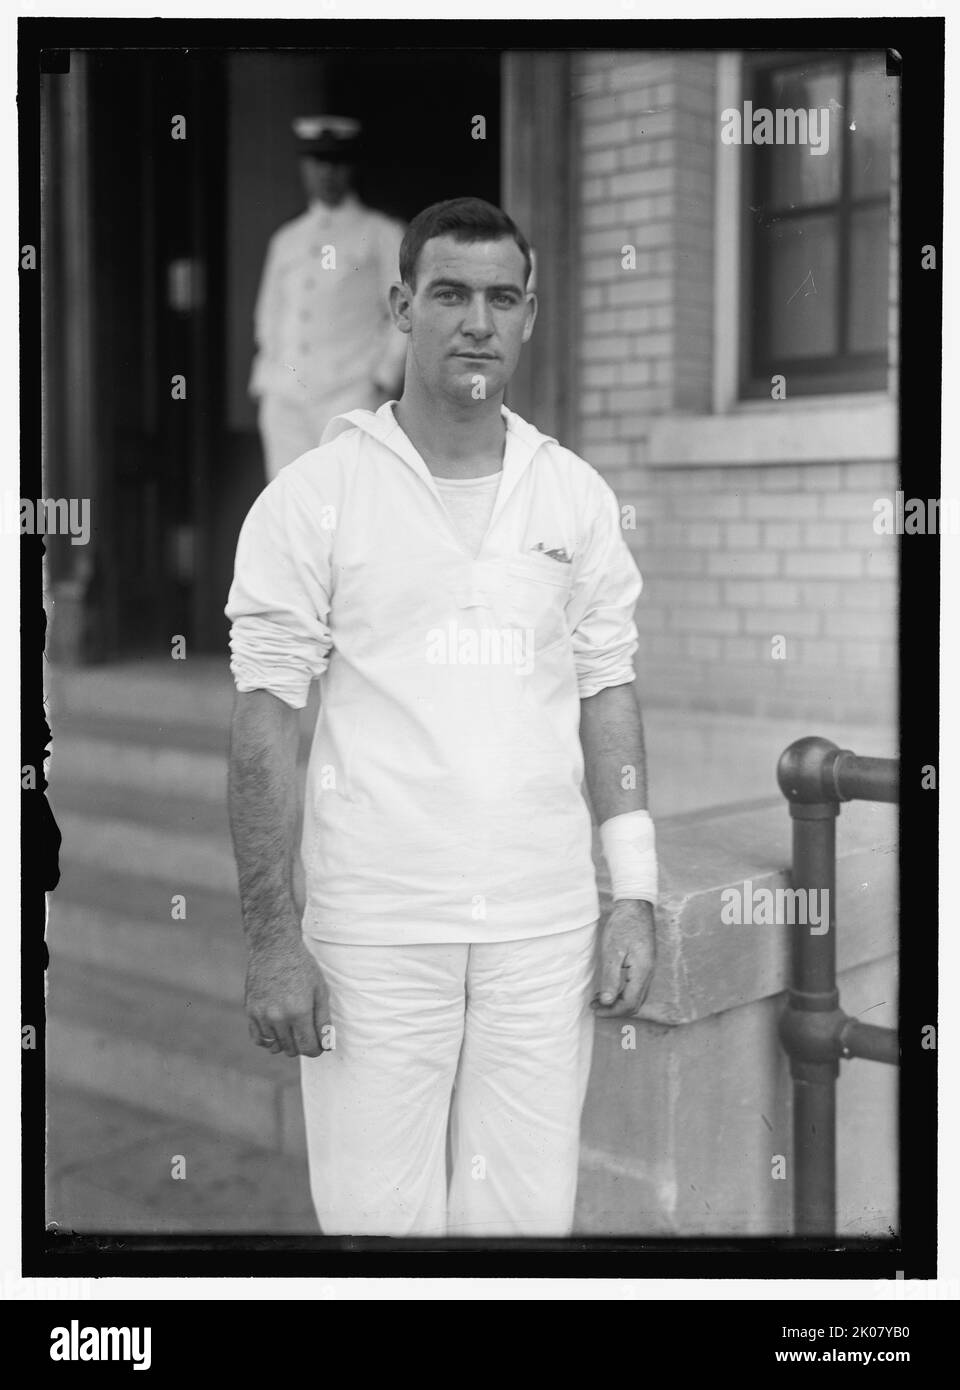 W. Phillips, wounded sailor from U.S.S. Memphis, c1916. US Navy ship USS Tennessee was renamed Memphis in 1916. The ship was lost off Santo Domingo the same year, with 43 crew members dead or missing. Stock Photo